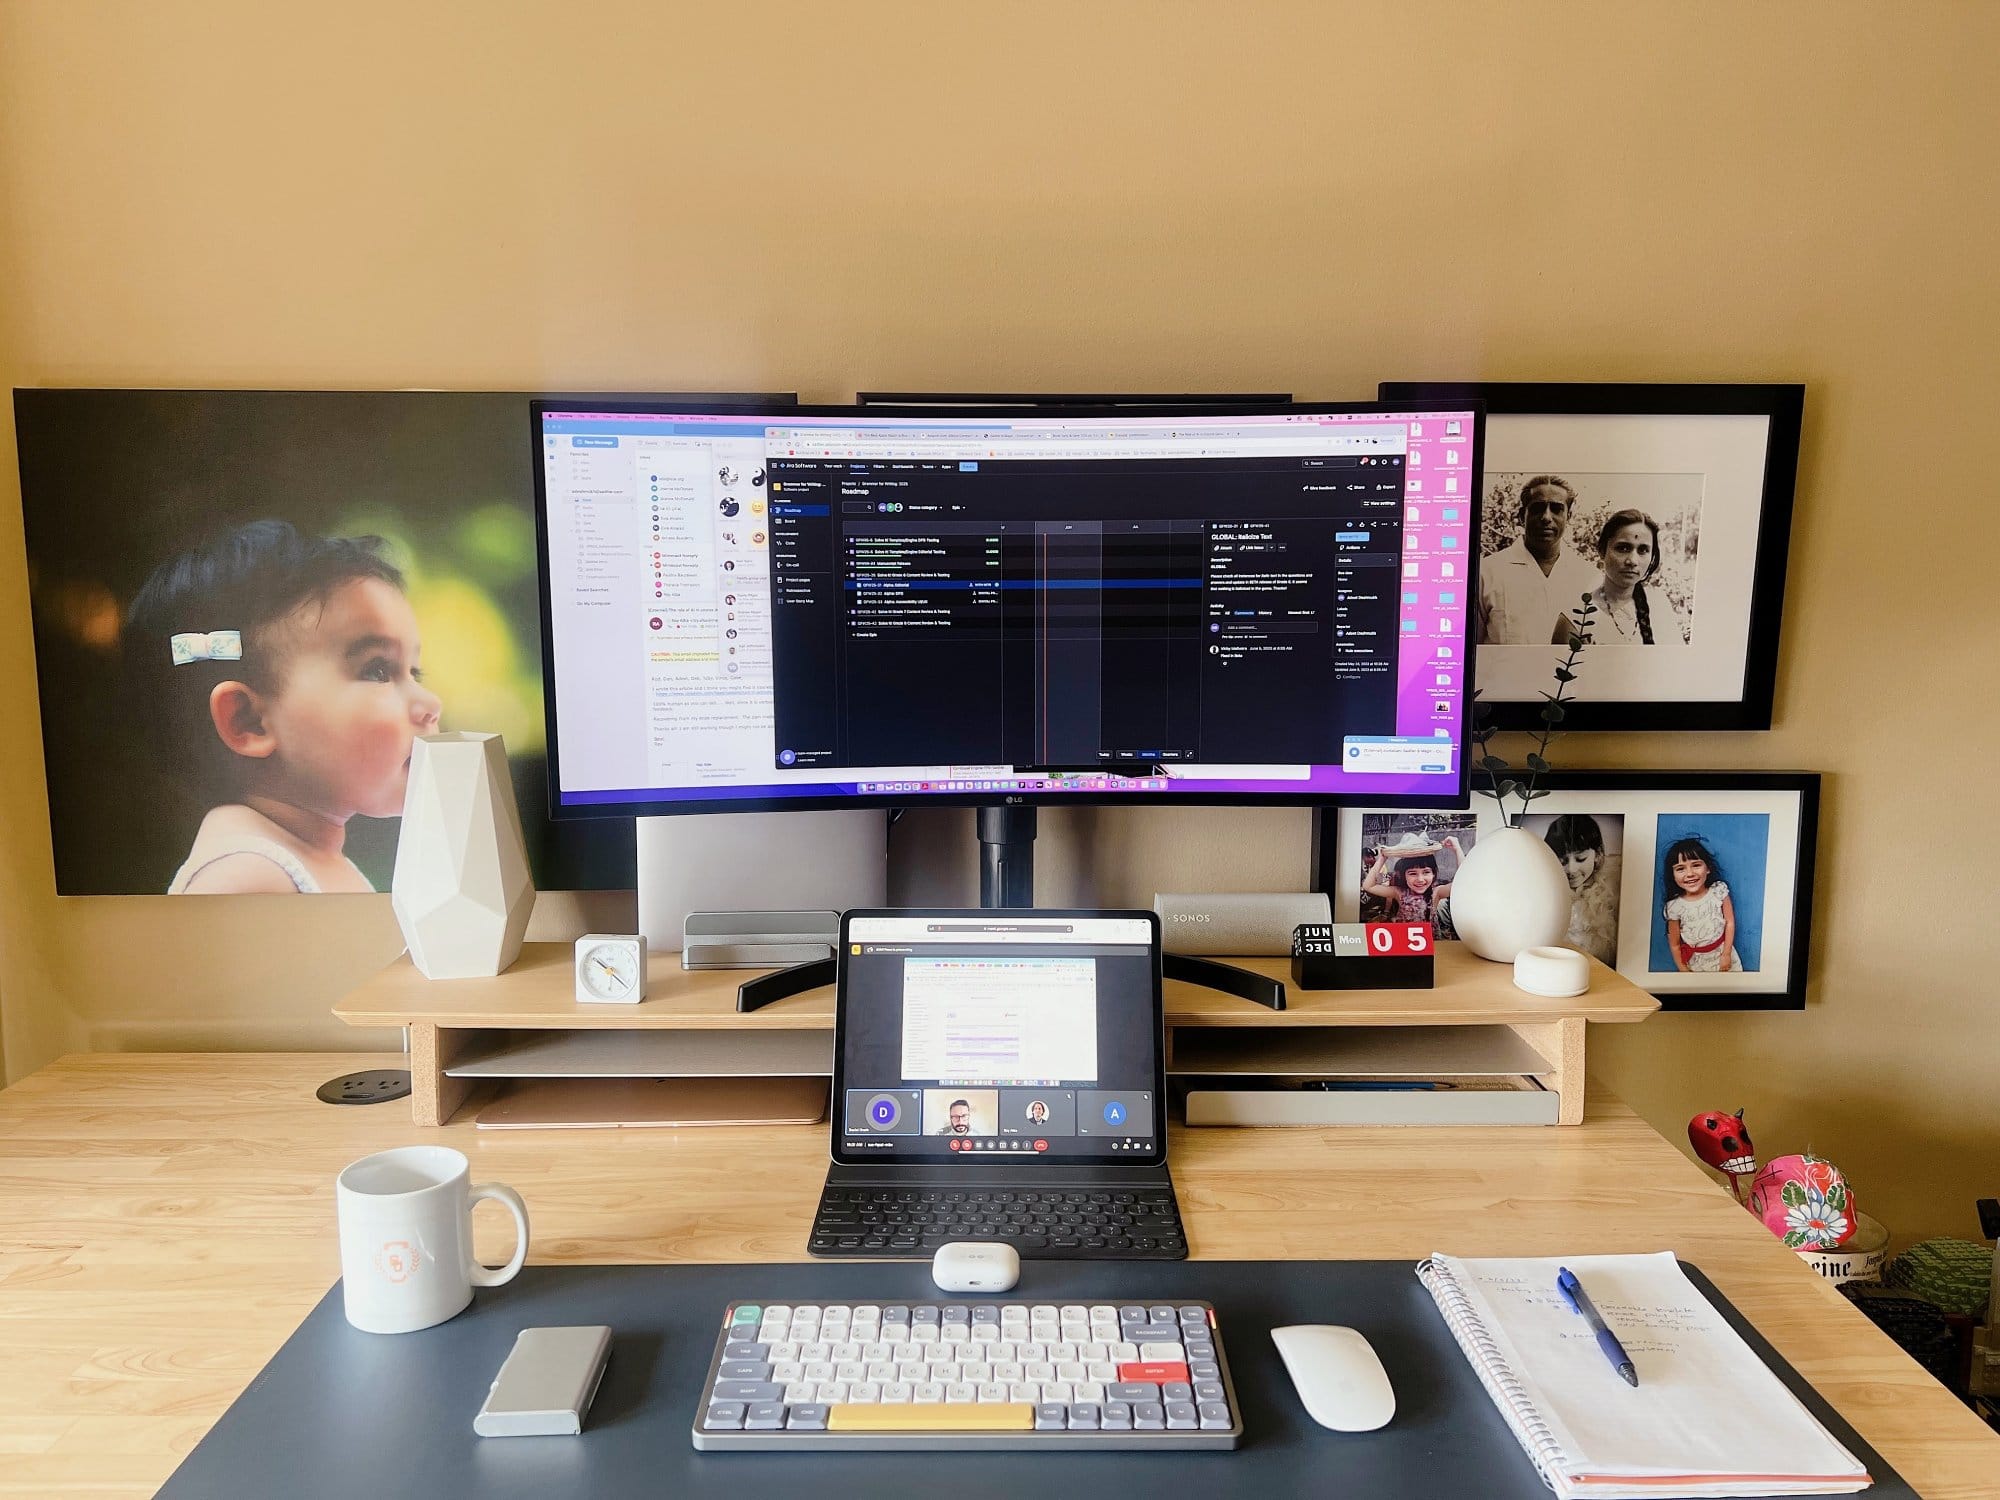 A tidy home office space with a large monitor, a laptop, a mechanical keyboard, and family photographs on the wall, illuminated by soft natural light